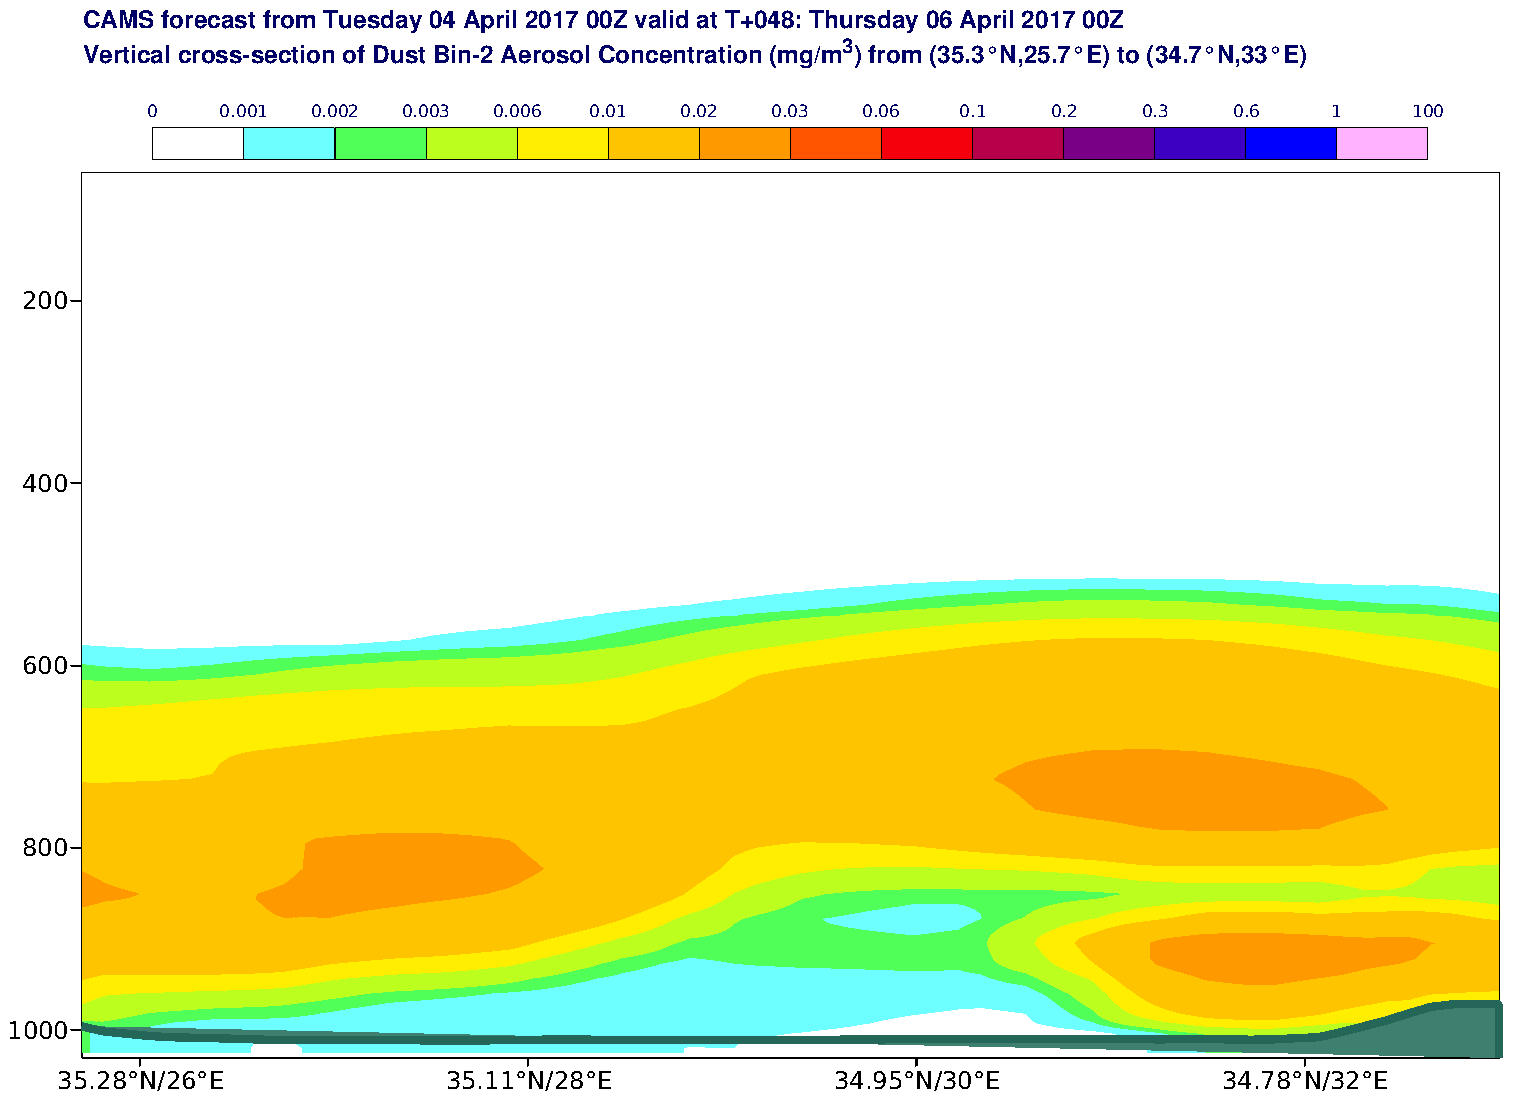 Vertical cross-section of Dust Bin-2 Aerosol Concentration (mg/m3) valid at T48 - 2017-04-06 00:00